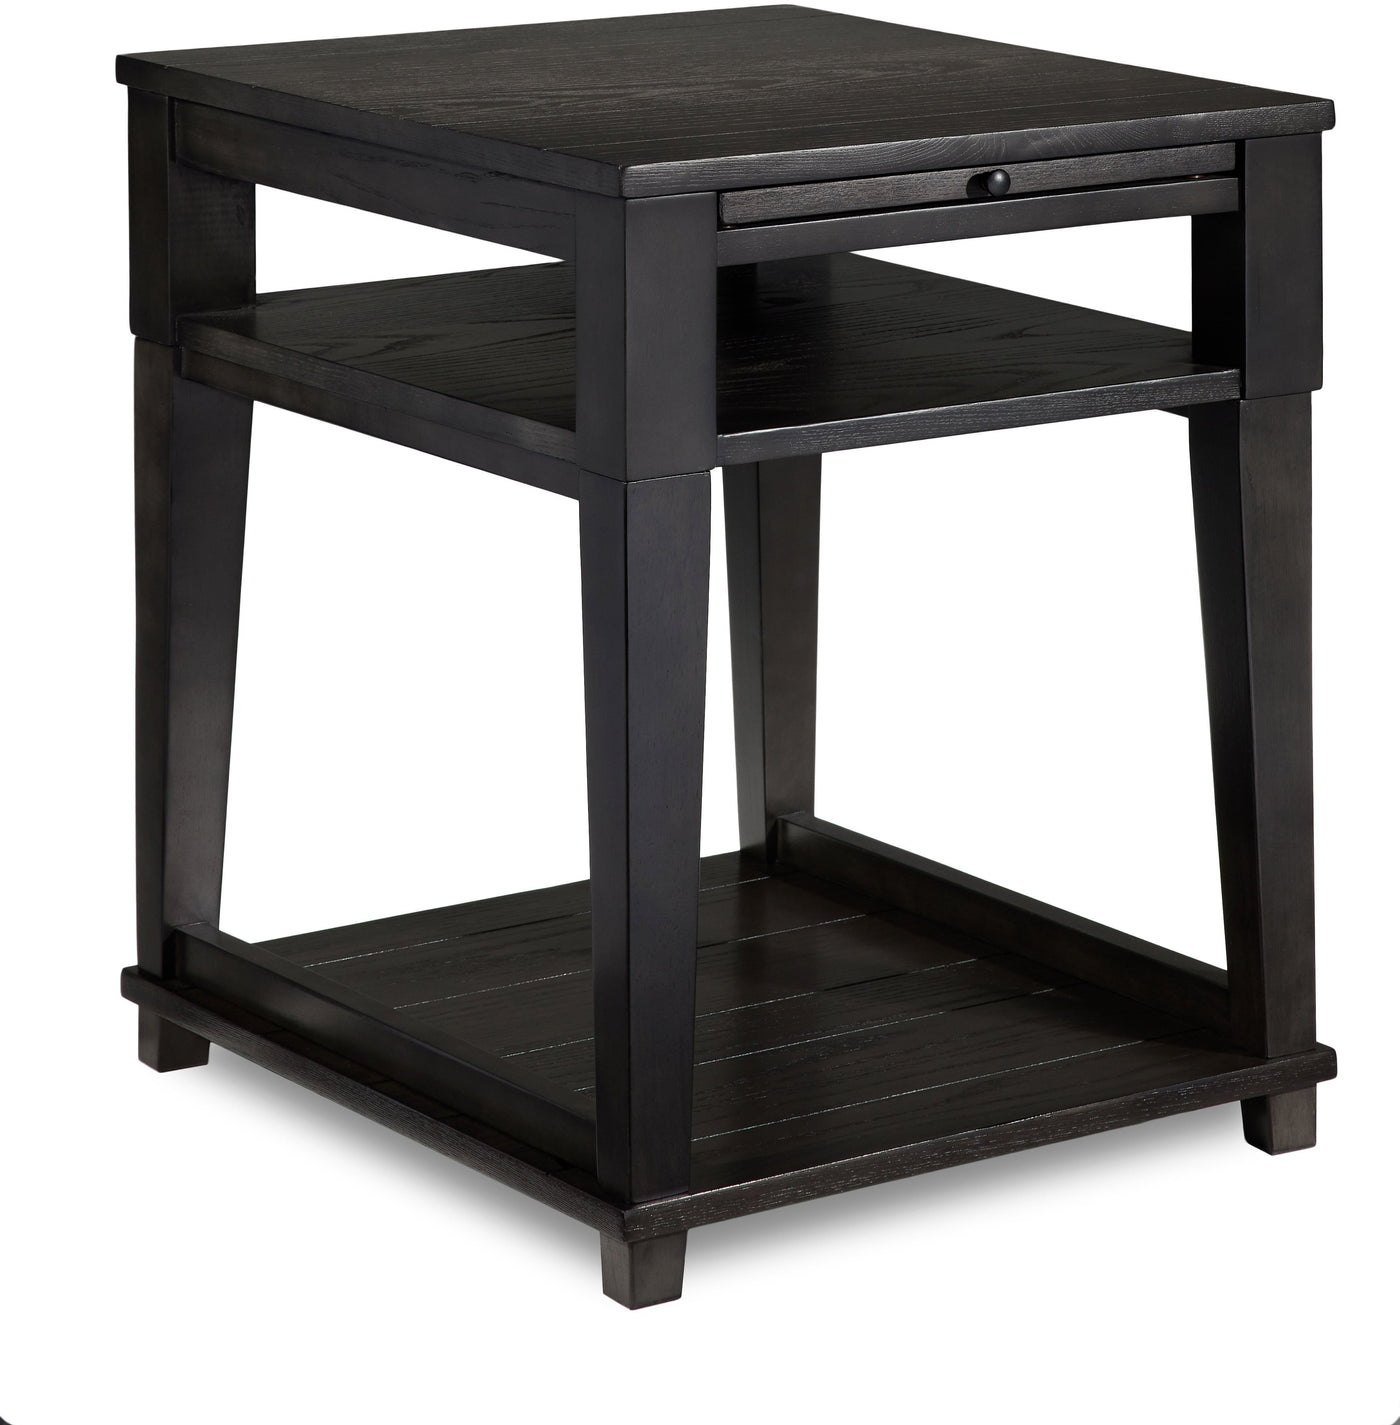 Brandon Chairside Table - African Grey